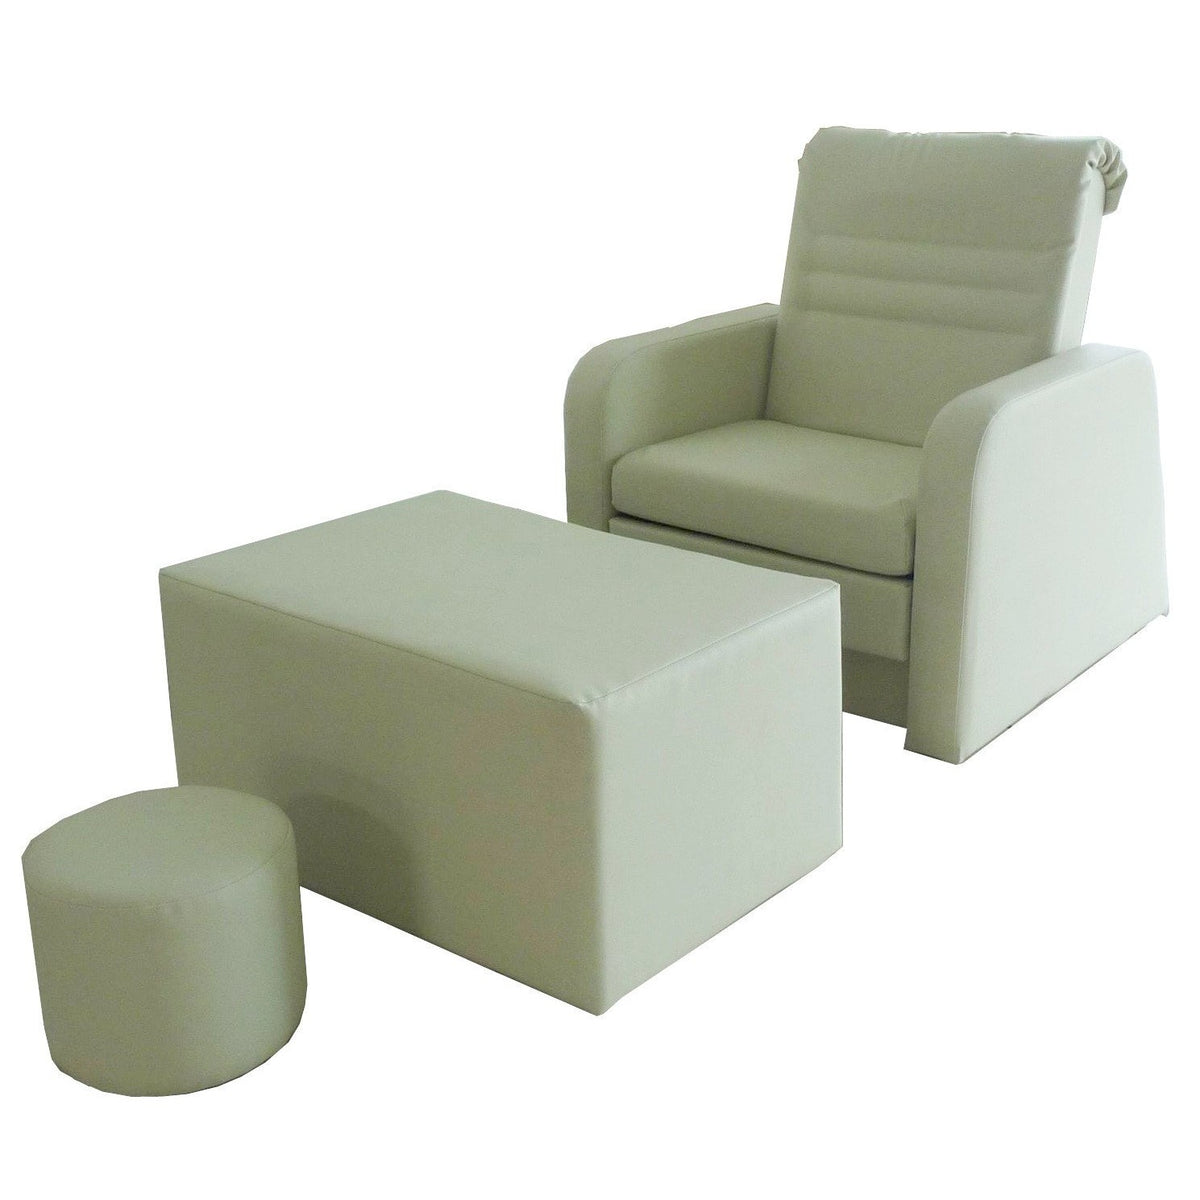 Touch America Destiny/Harmony Foot Massage Pedicure Chair Set Pedicure &amp; Spa Chairs - ChairsThatGive